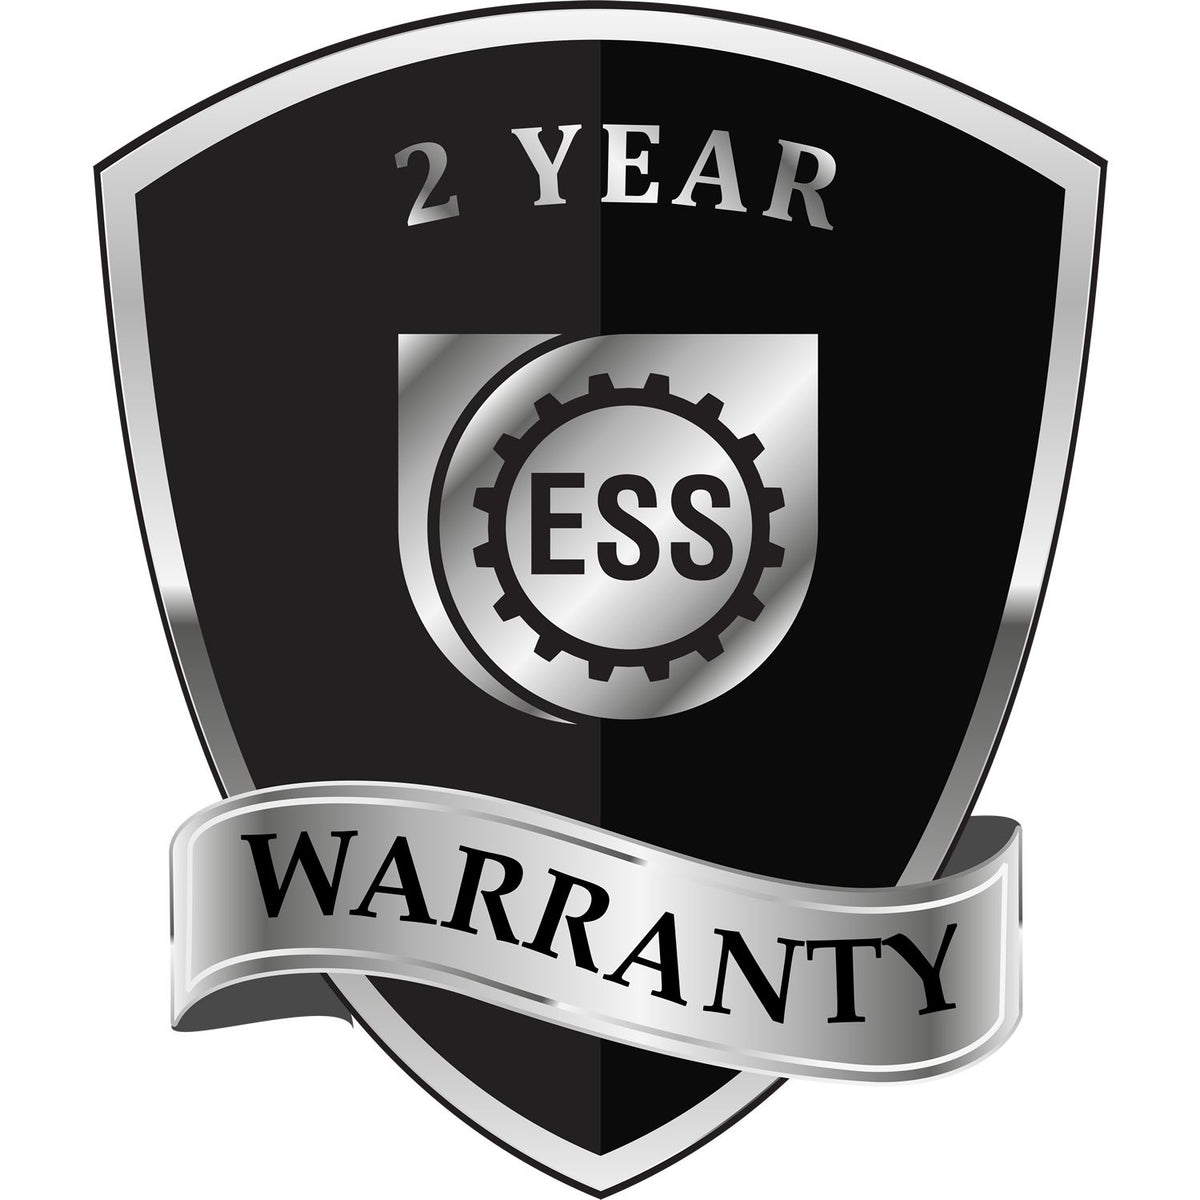 A black and silver badge or emblem showing warranty information for the Long Reach Illinois Geology Seal